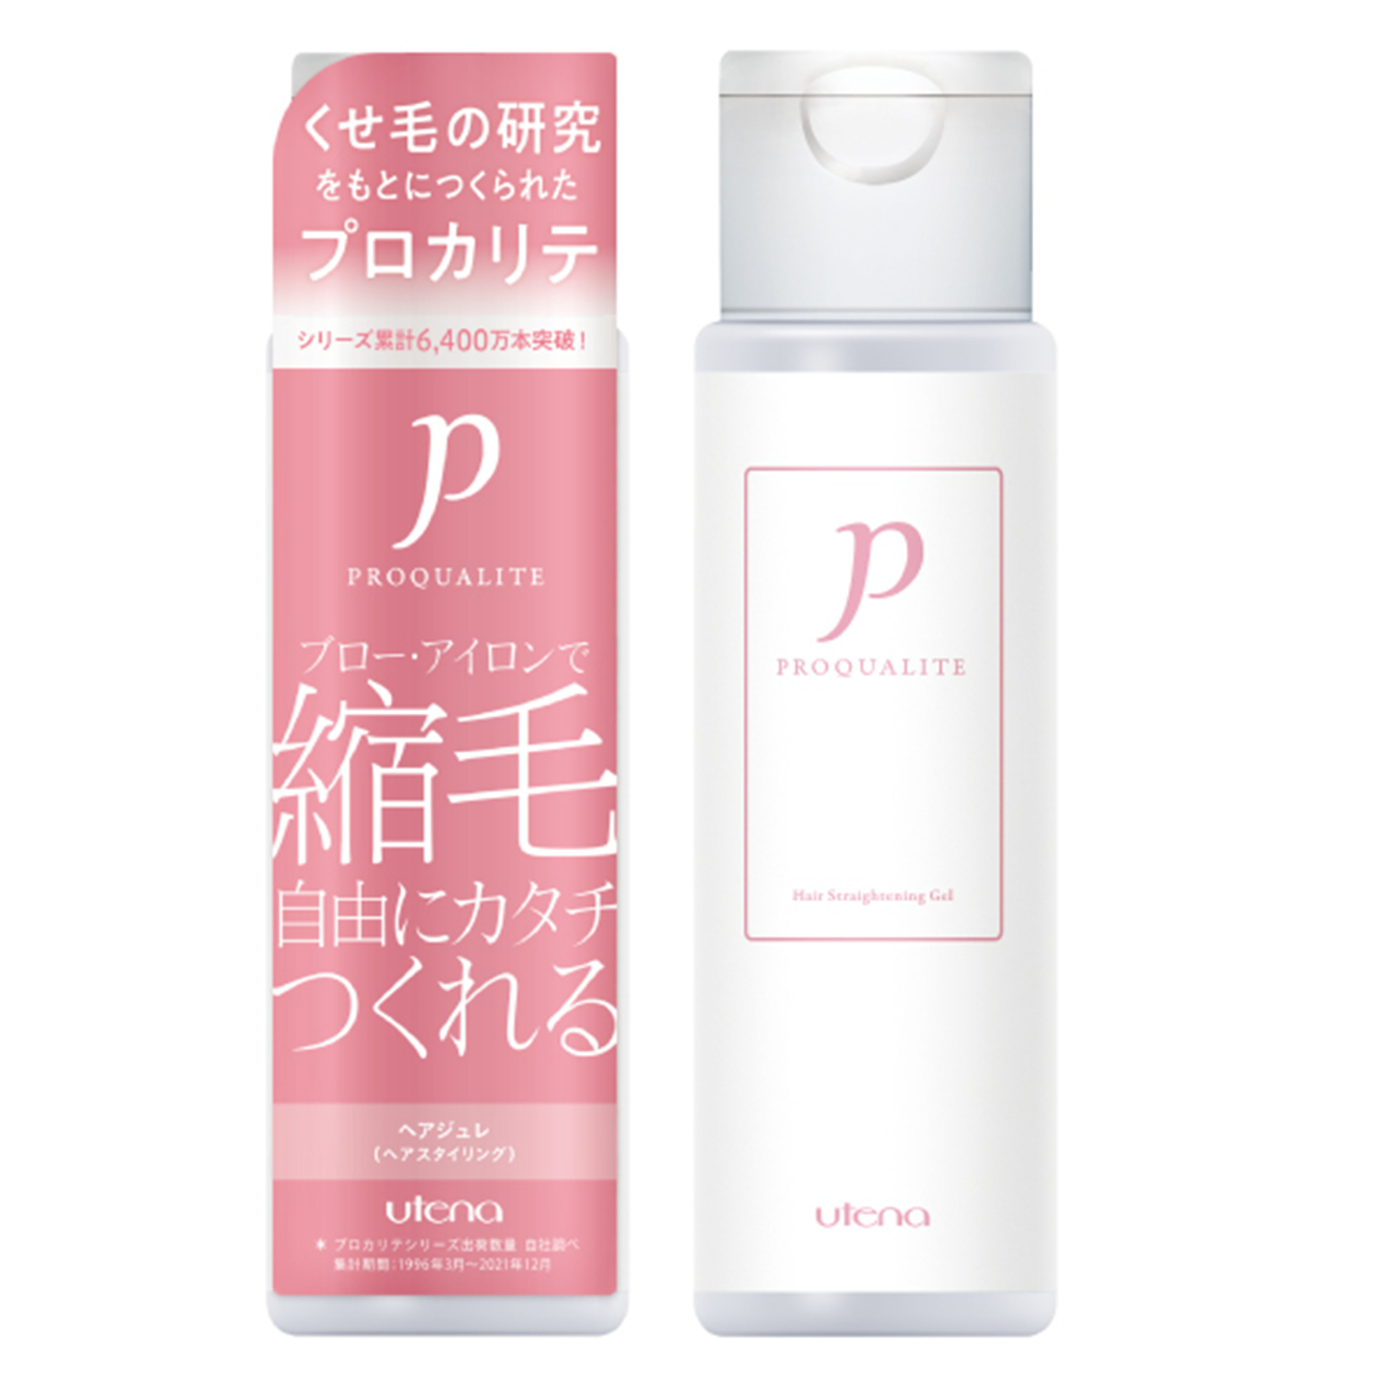 Utena PROQUALITE Hair Jelly -175ml - Harajuku Culture Japan - Japanease Products Store Beauty and Stationery